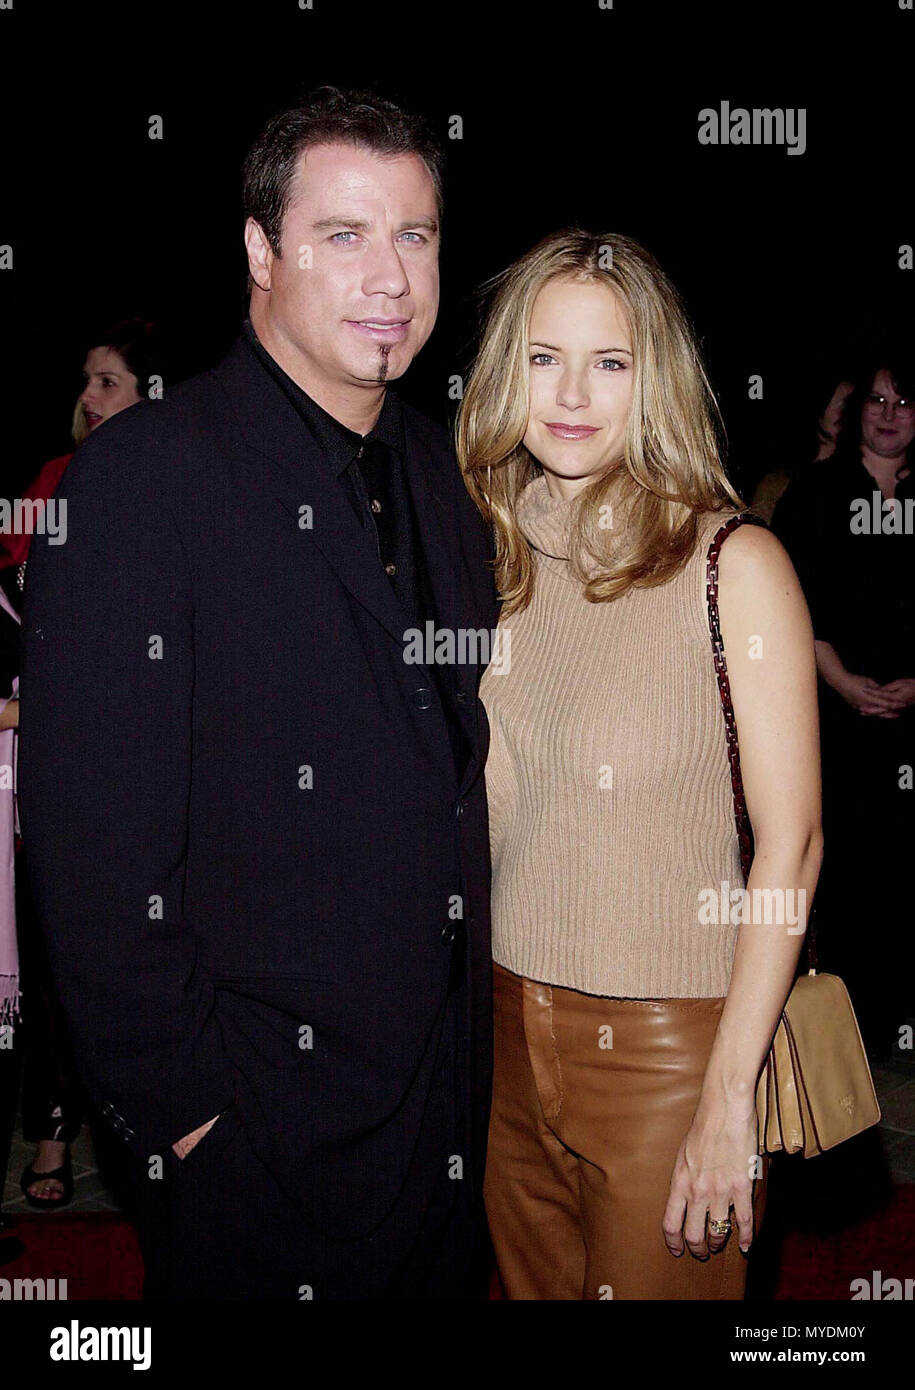 24 Oct 2000, Los Angeles, California, USA --- Original caption: Lucky Number Premiere was on the Paramount lot, in Los Angeles. --- Image by © . / USAKelley Preston with John Travolta Red Carpet Event, Vertical, USA, Film Industry, Celebrities,  Photography, Bestof, Arts Culture and Entertainment, Topix Celebrities fashion /  Vertical, Best of, Event in Hollywood Life - California,  Red Carpet and backstage, USA, Film Industry, Celebrities,  movie celebrities, TV celebrities, Music celebrities, Photography, Bestof, Arts Culture and Entertainment,  Topix,  vertical,, inquiry tsuni@Gamma-USA.com Stock Photo